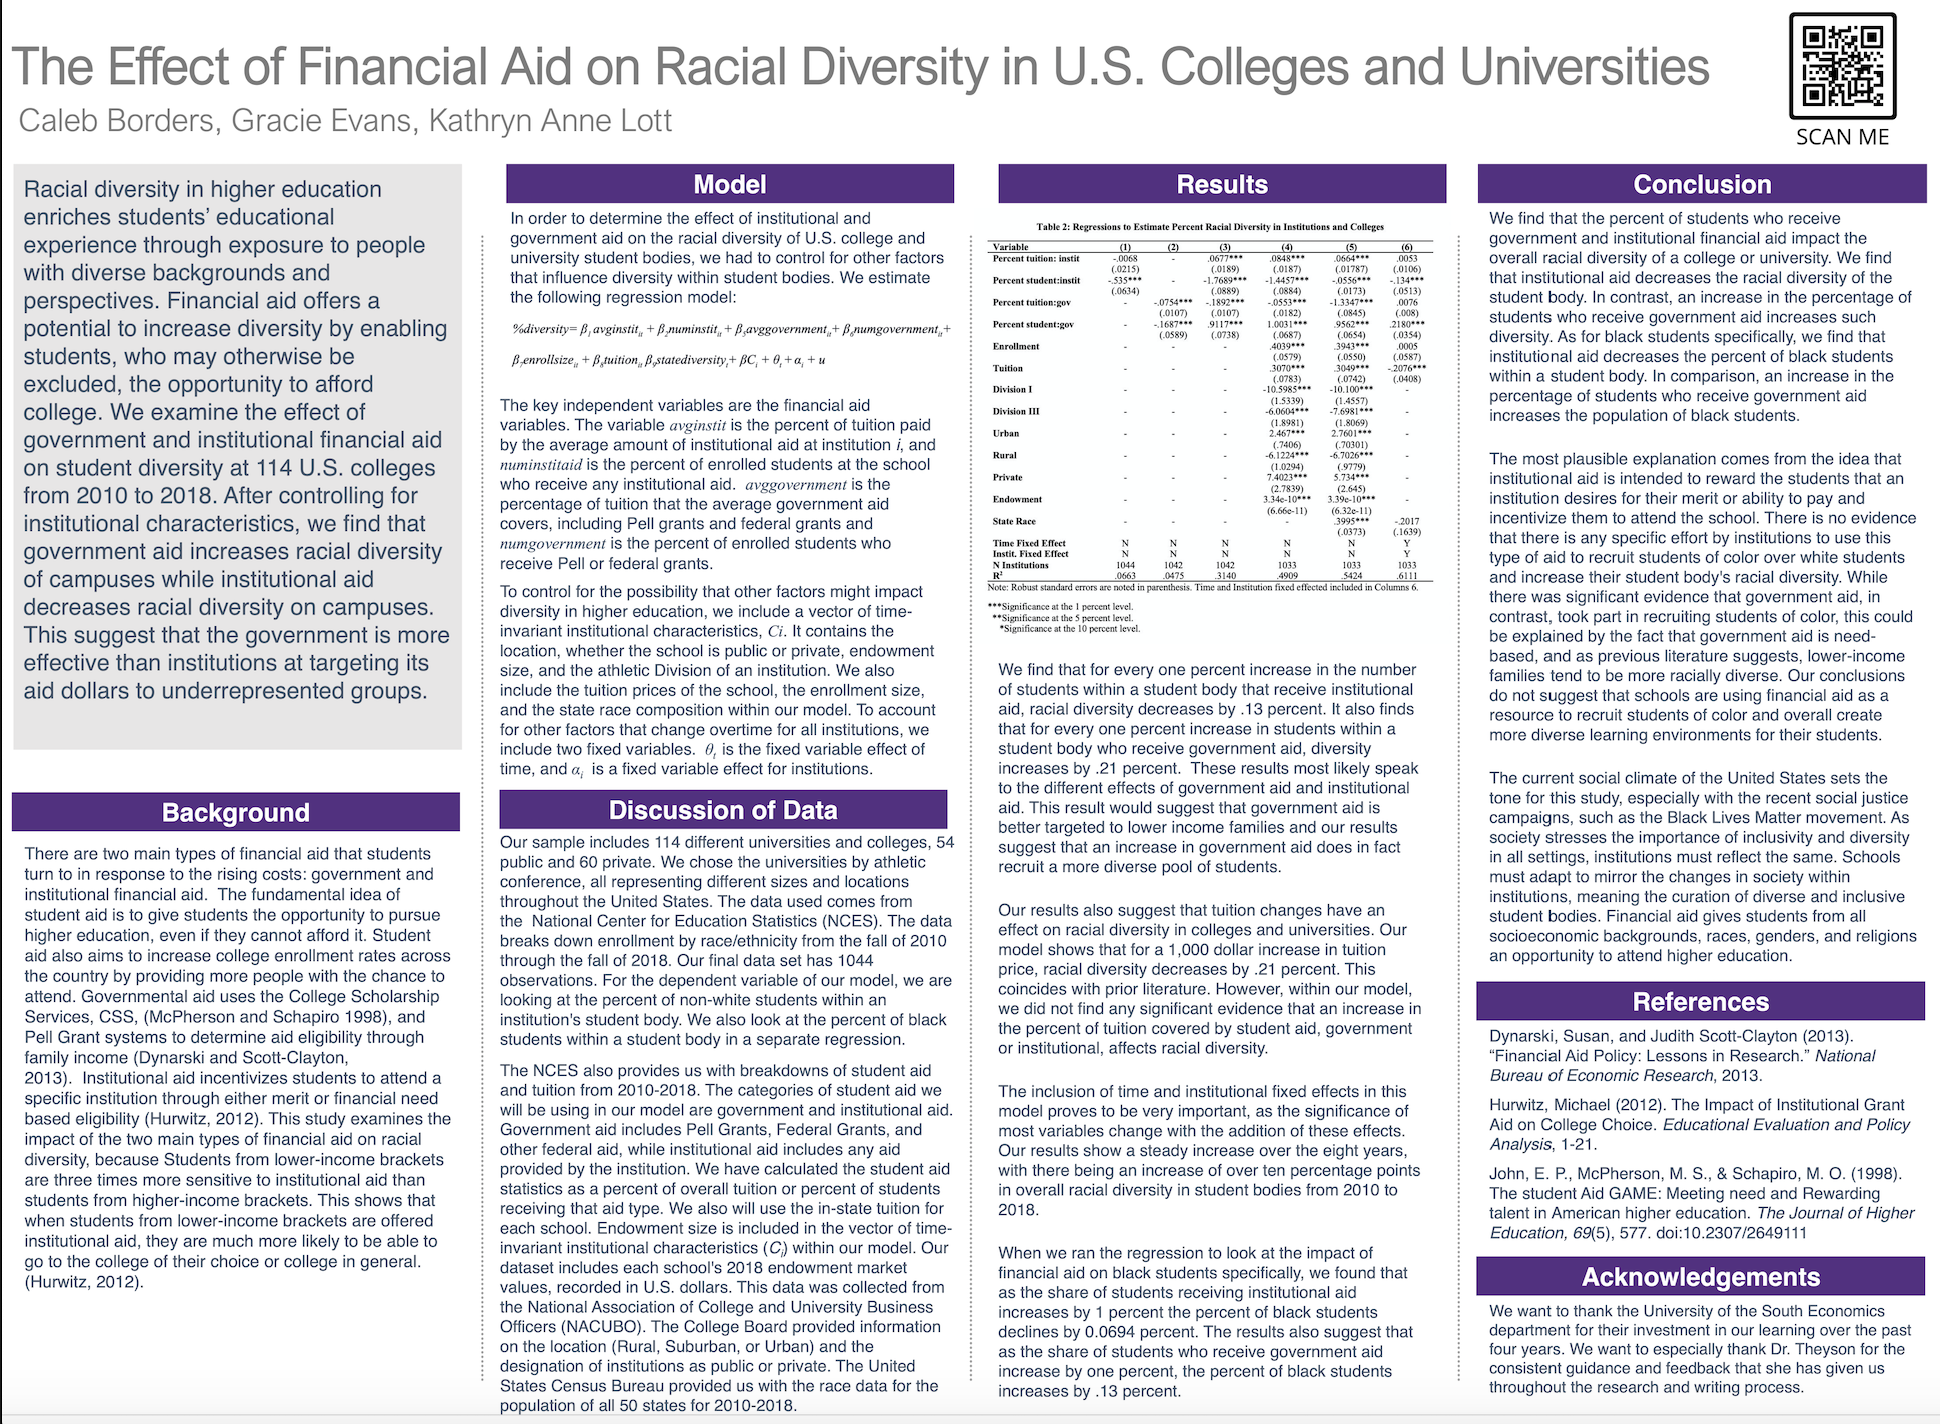 Showcase Image for The Effect of Financial Aid on Racial Diversity in U.S. Colleges and Universities